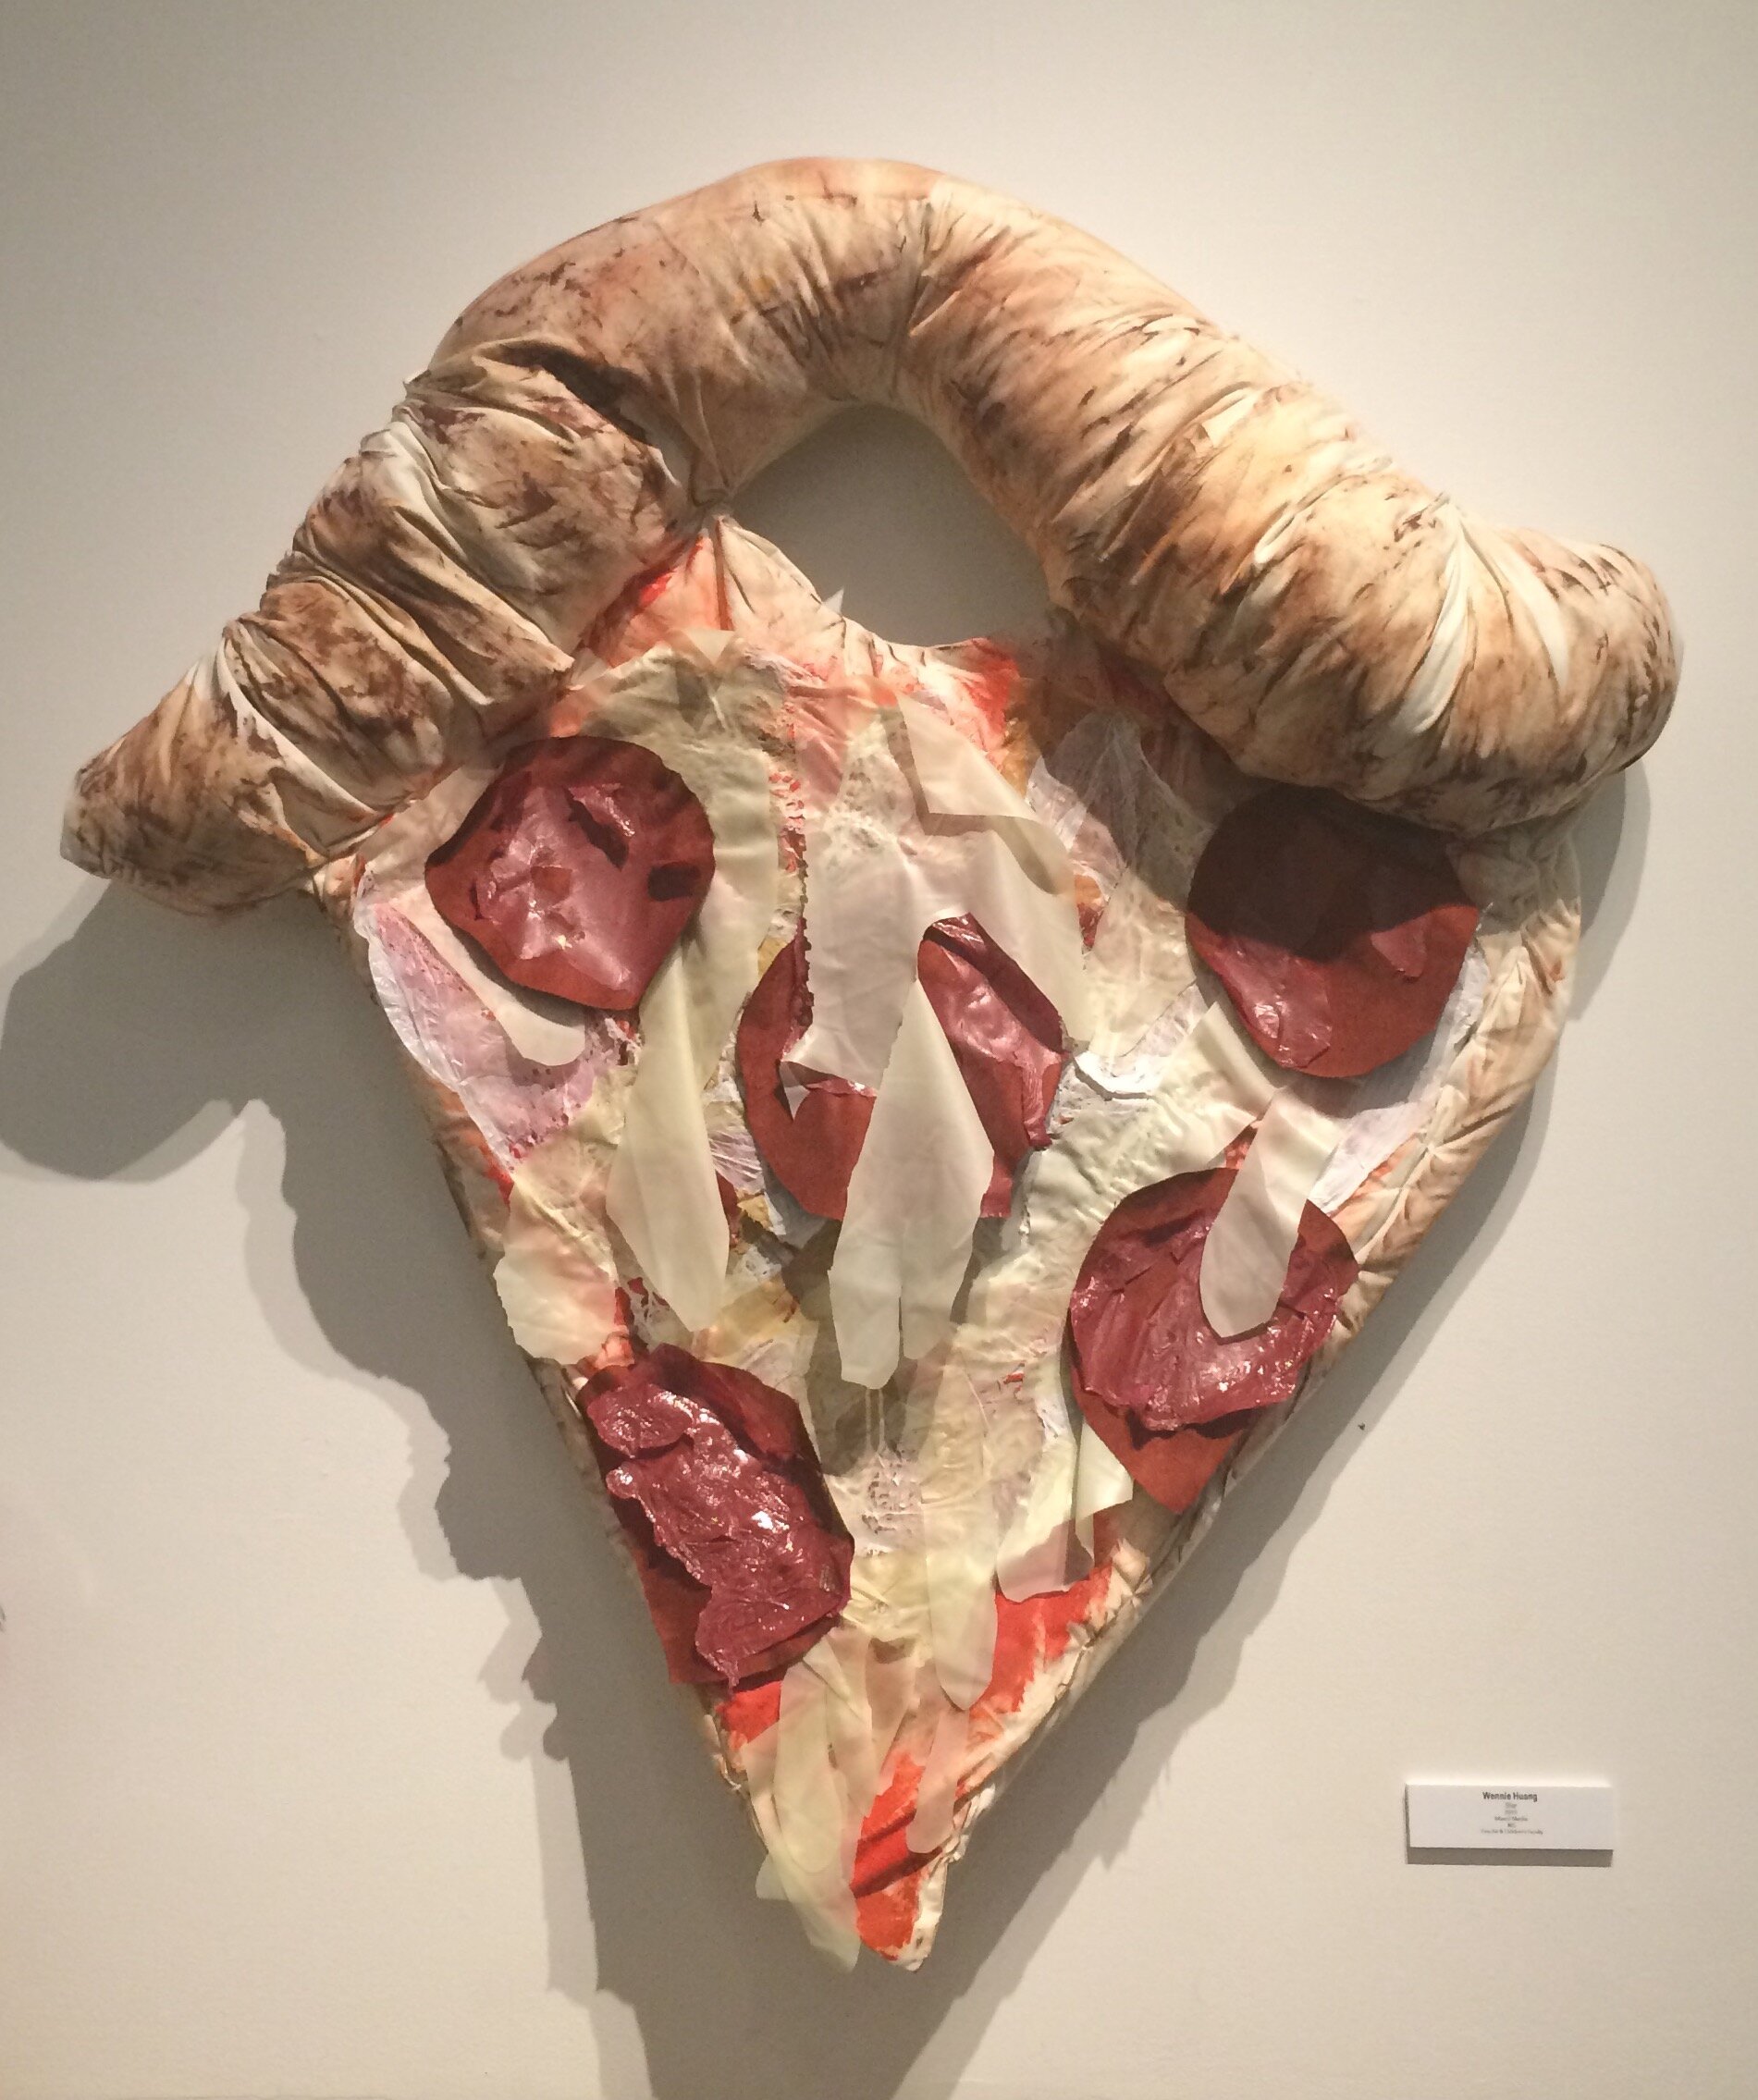  Wennie Huang (PiV ‘93),  Slice , 2015. Fabric, acrylic paint, latex, cardboard; 30 x 36 x 8 in. 